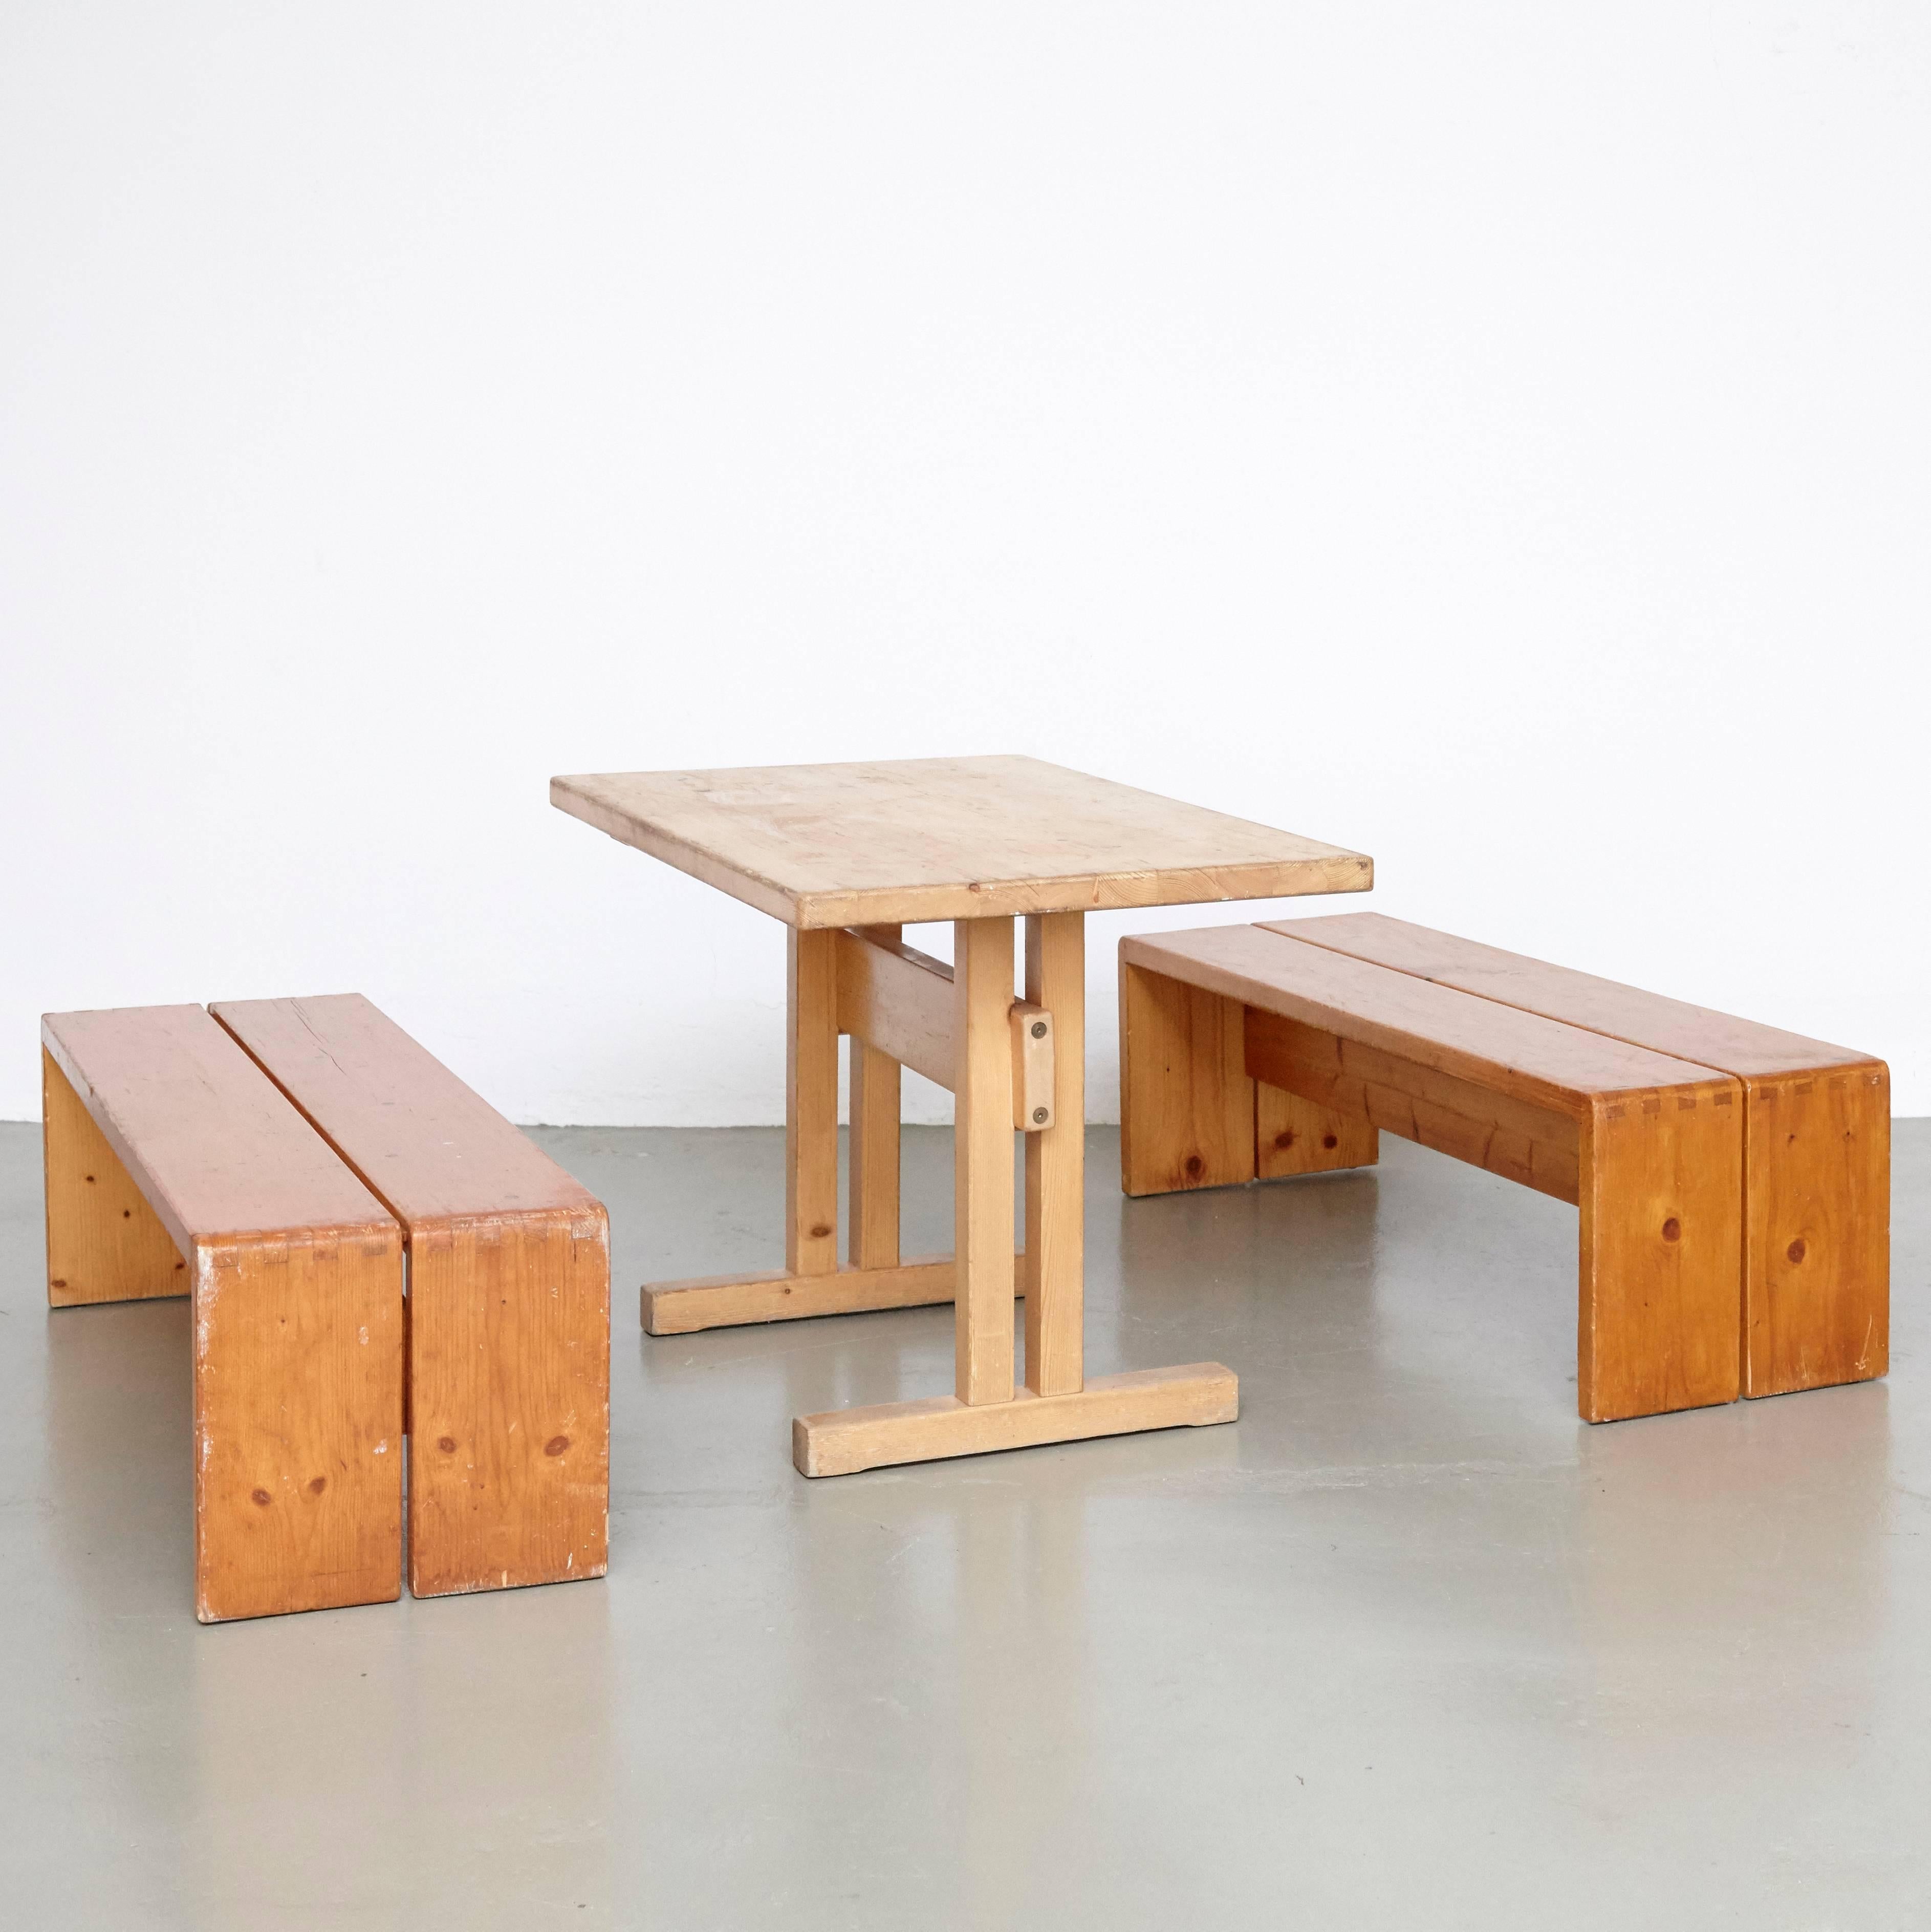 Set of table and benches designed by Charlotte Perriand for Les Arcs ski Resort, circa 1960, manufactured in France.

Pinewood.

In good original condition, with minor wear consistent with age and use, preserving a beautiful patina.

Charlotte